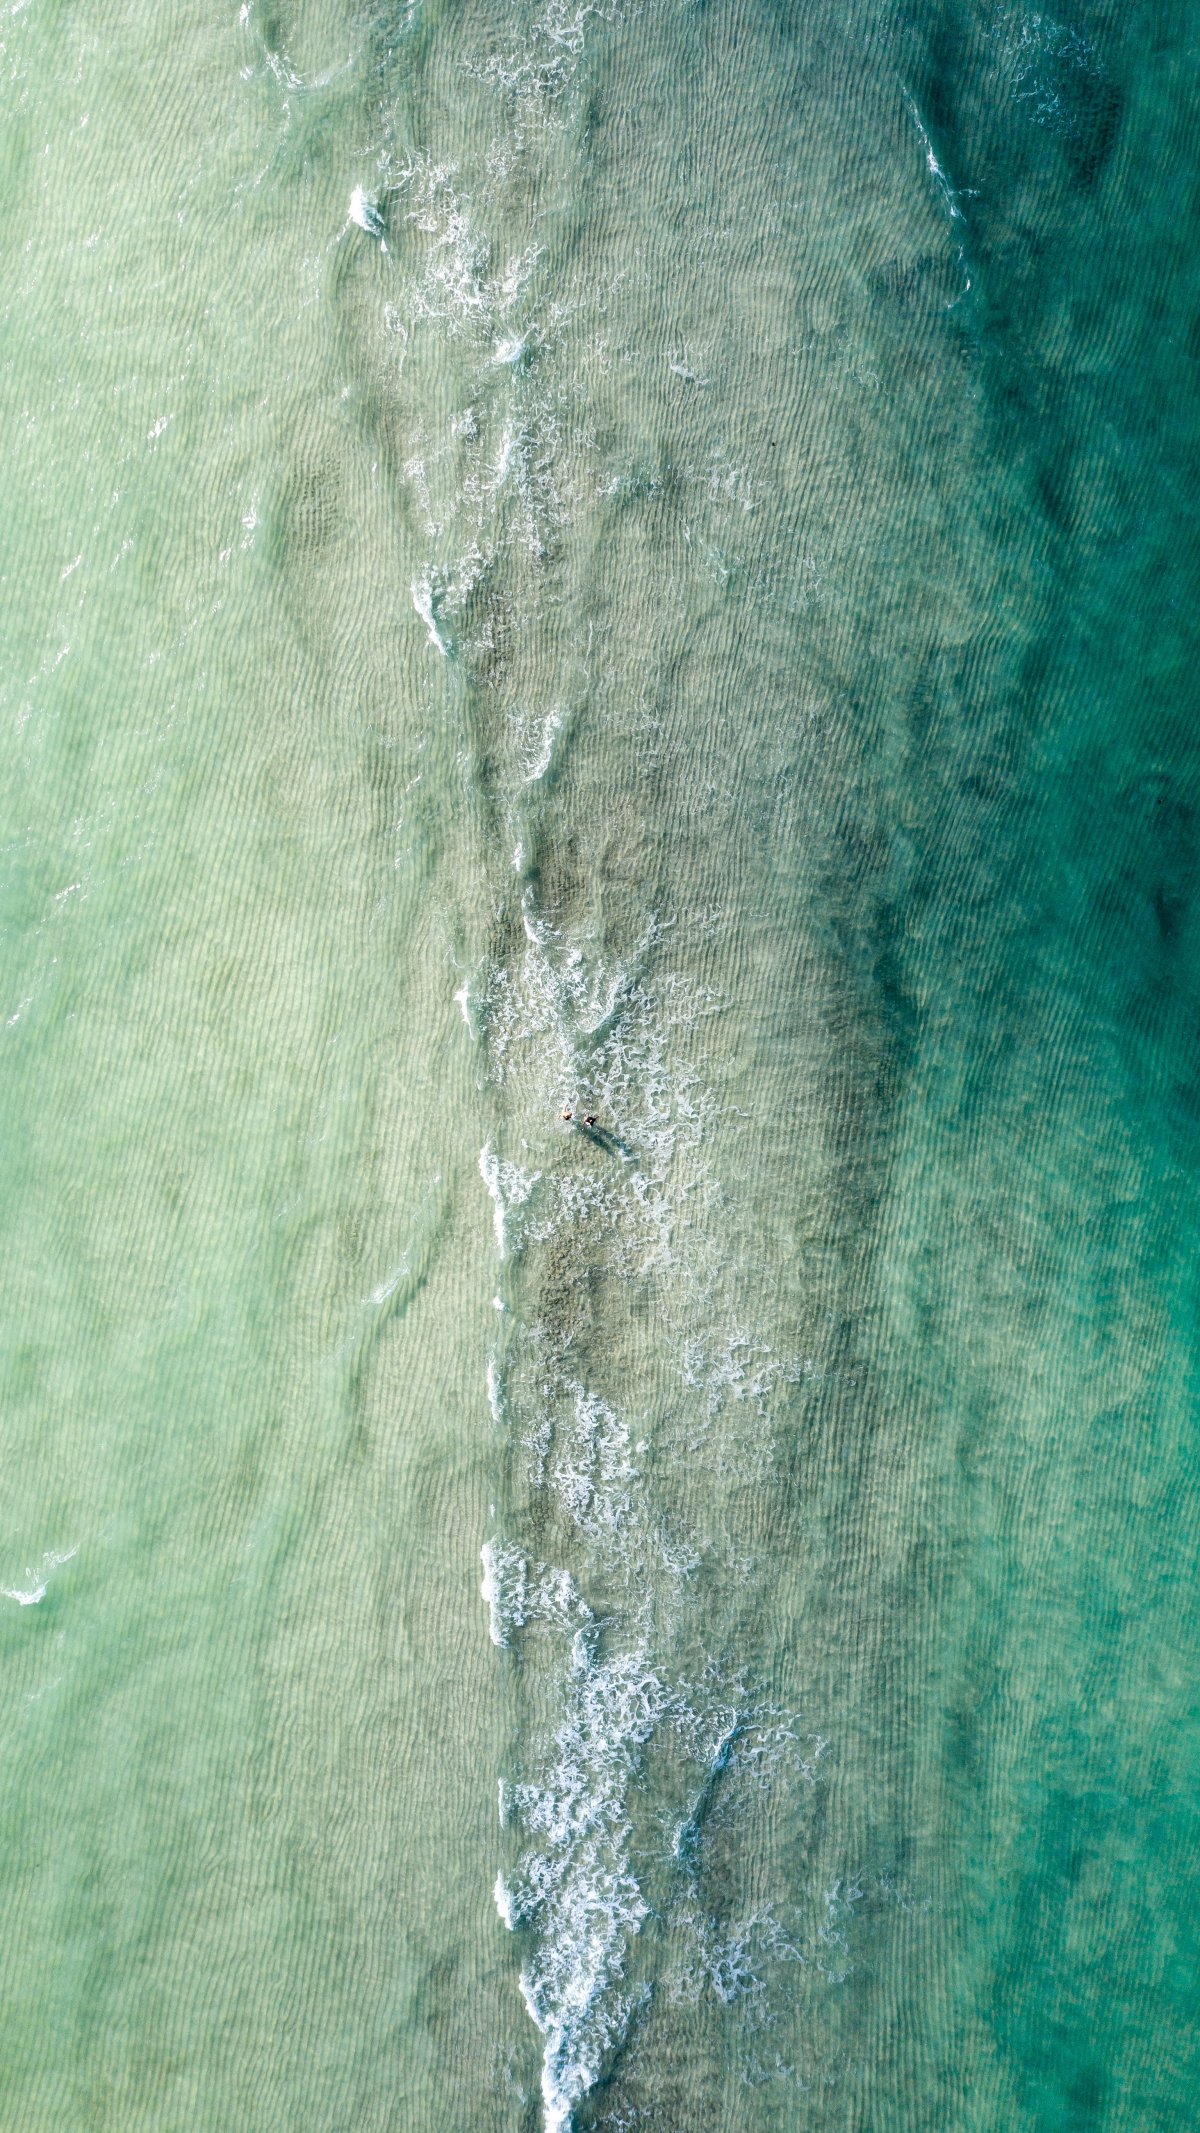 Aerial photo of clear sea water